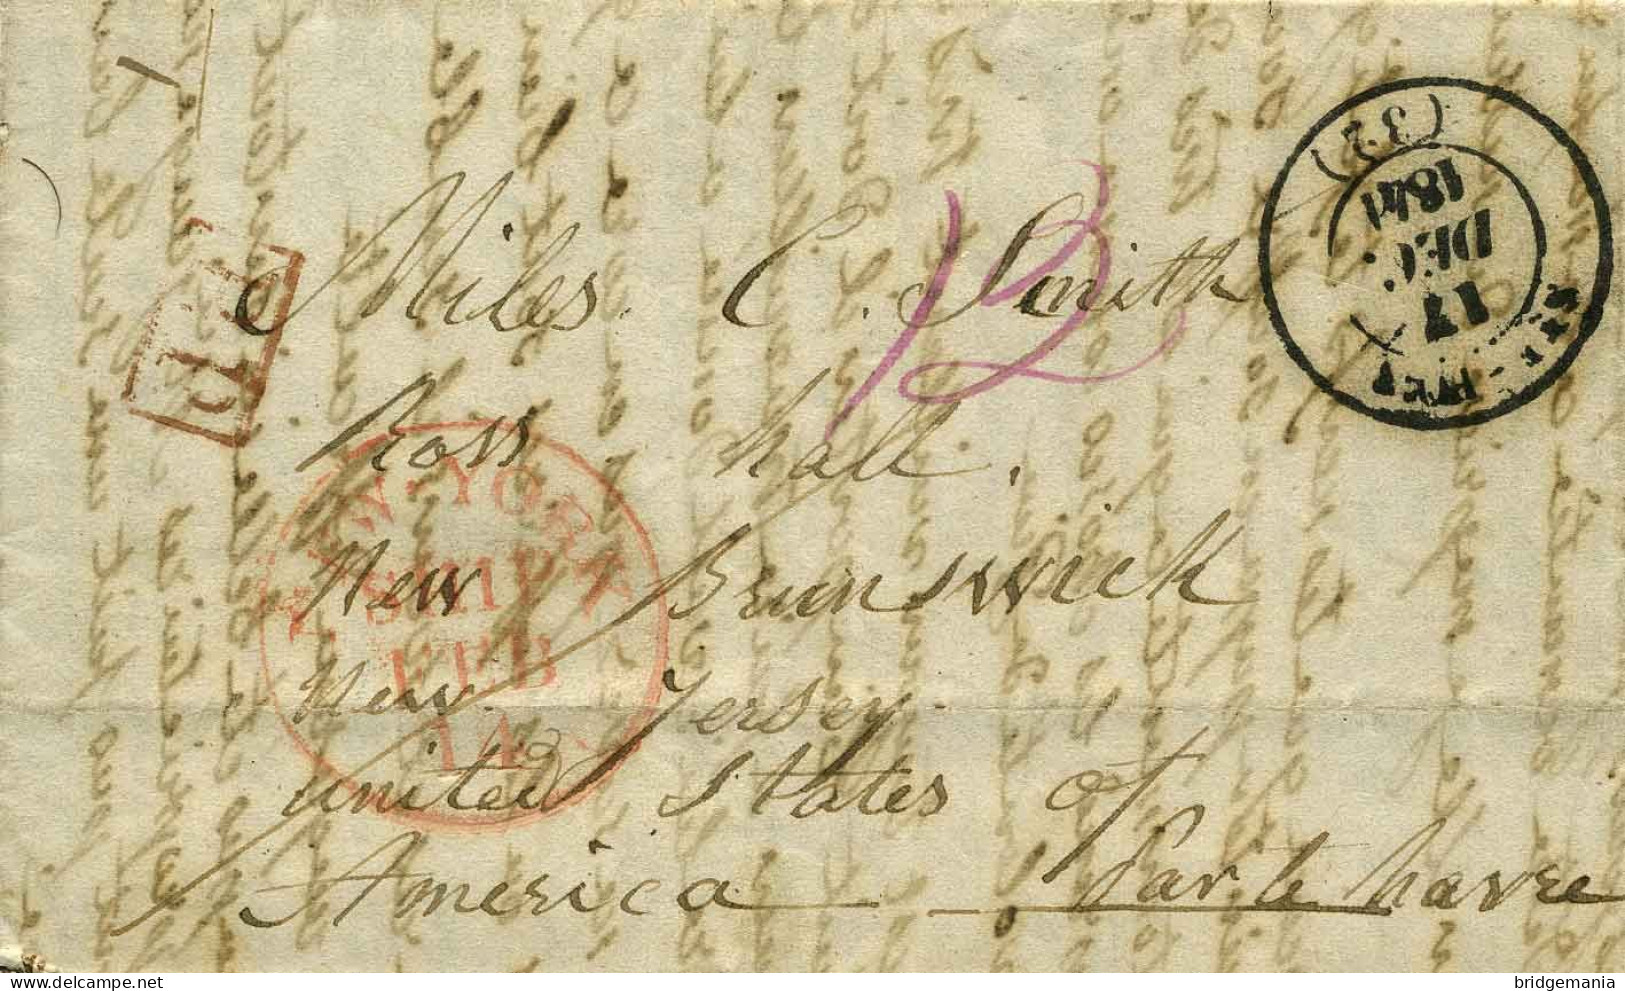 MTM119 - 1841 TRANSATLANTIC LETTER FRANCE TO USA NON-CONTRACT STEAM. SIMPLE RATE - Poststempel